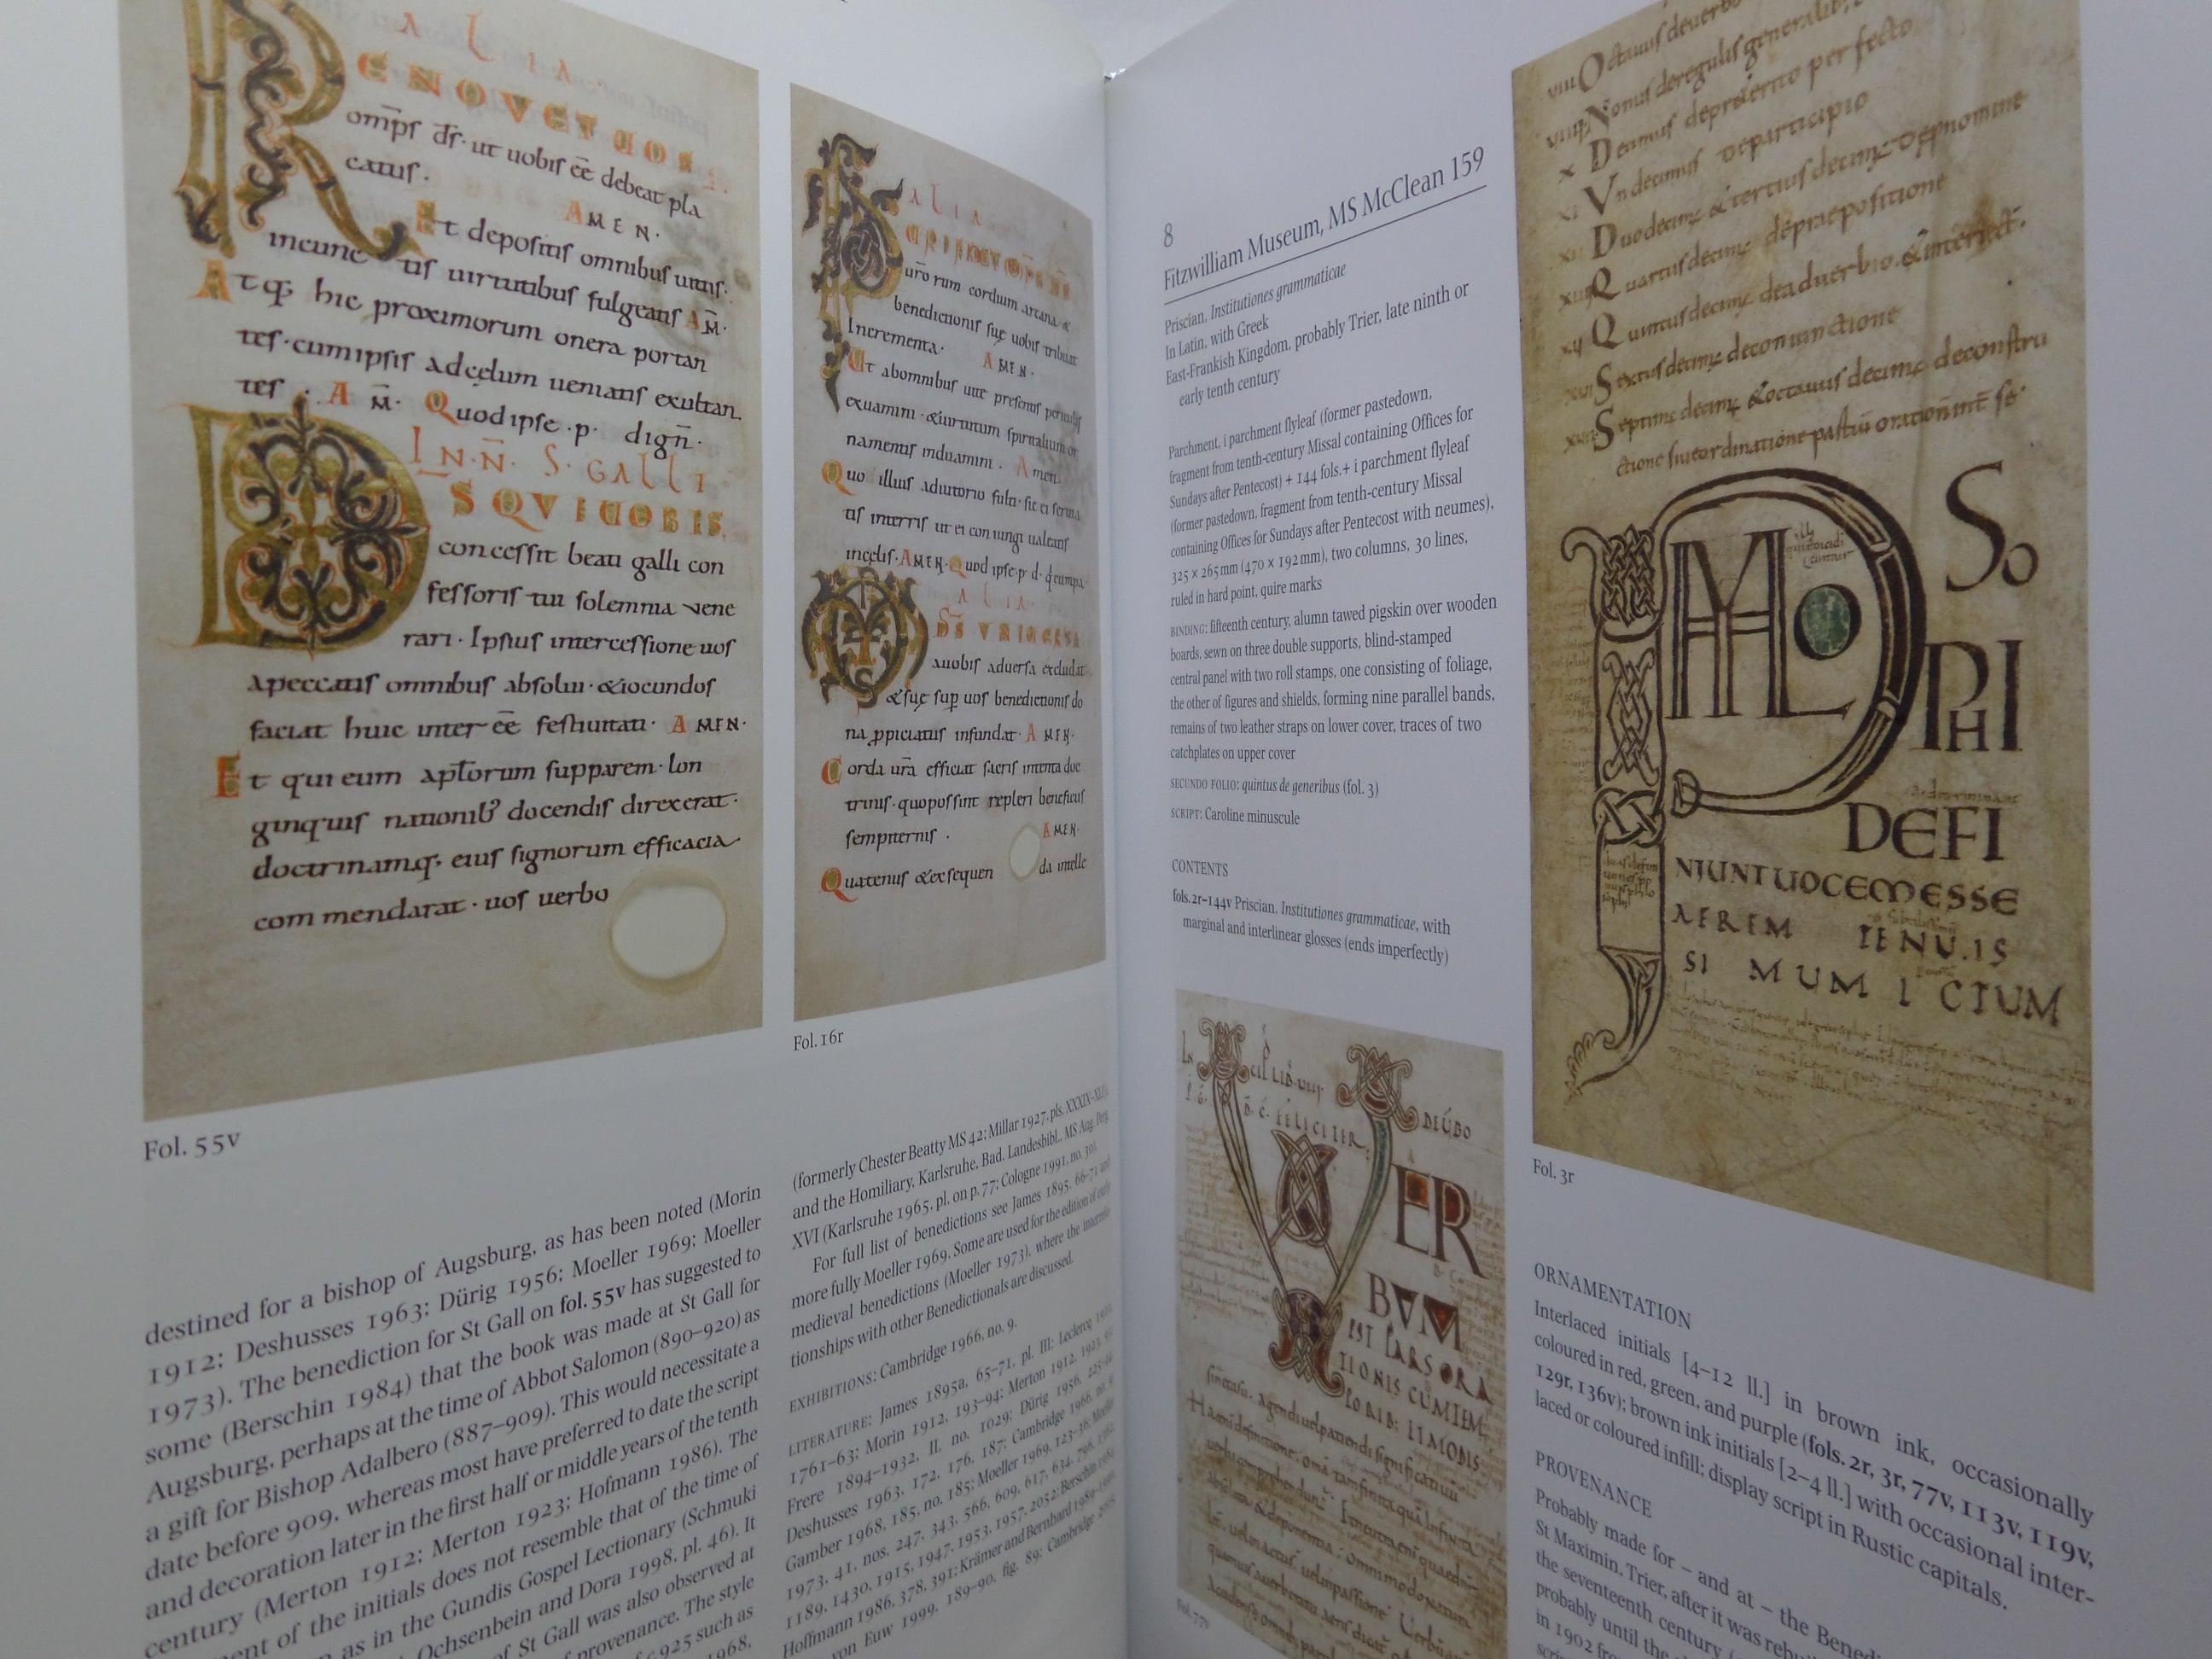 ILLUMINATED MANUSCRIPTS IN CAMBRIDGE 2009 PART ONE IN TWO VOLUMES, FIRST EDITION